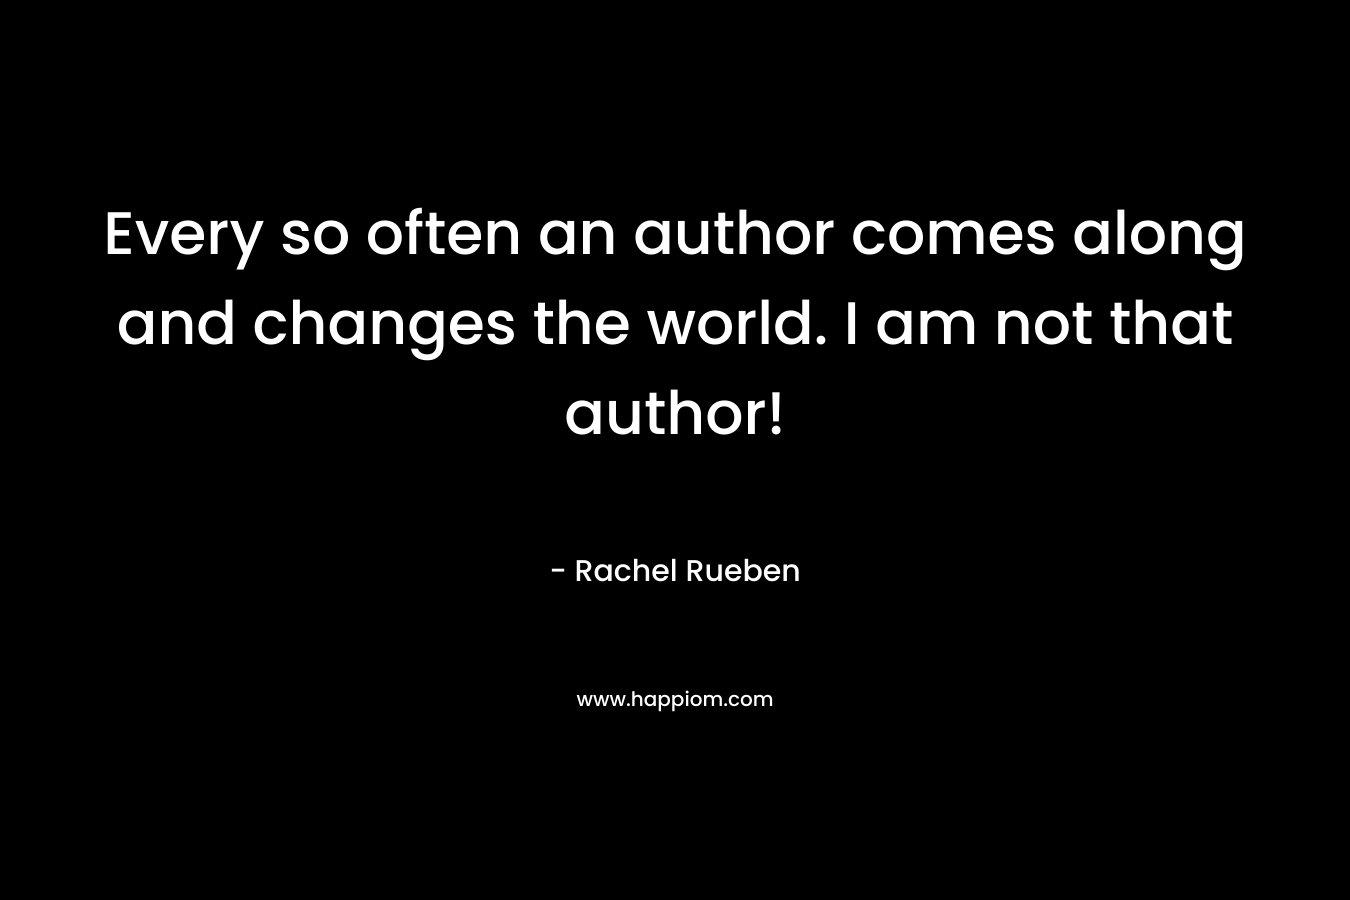 Every so often an author comes along and changes the world. I am not that author! – Rachel Rueben